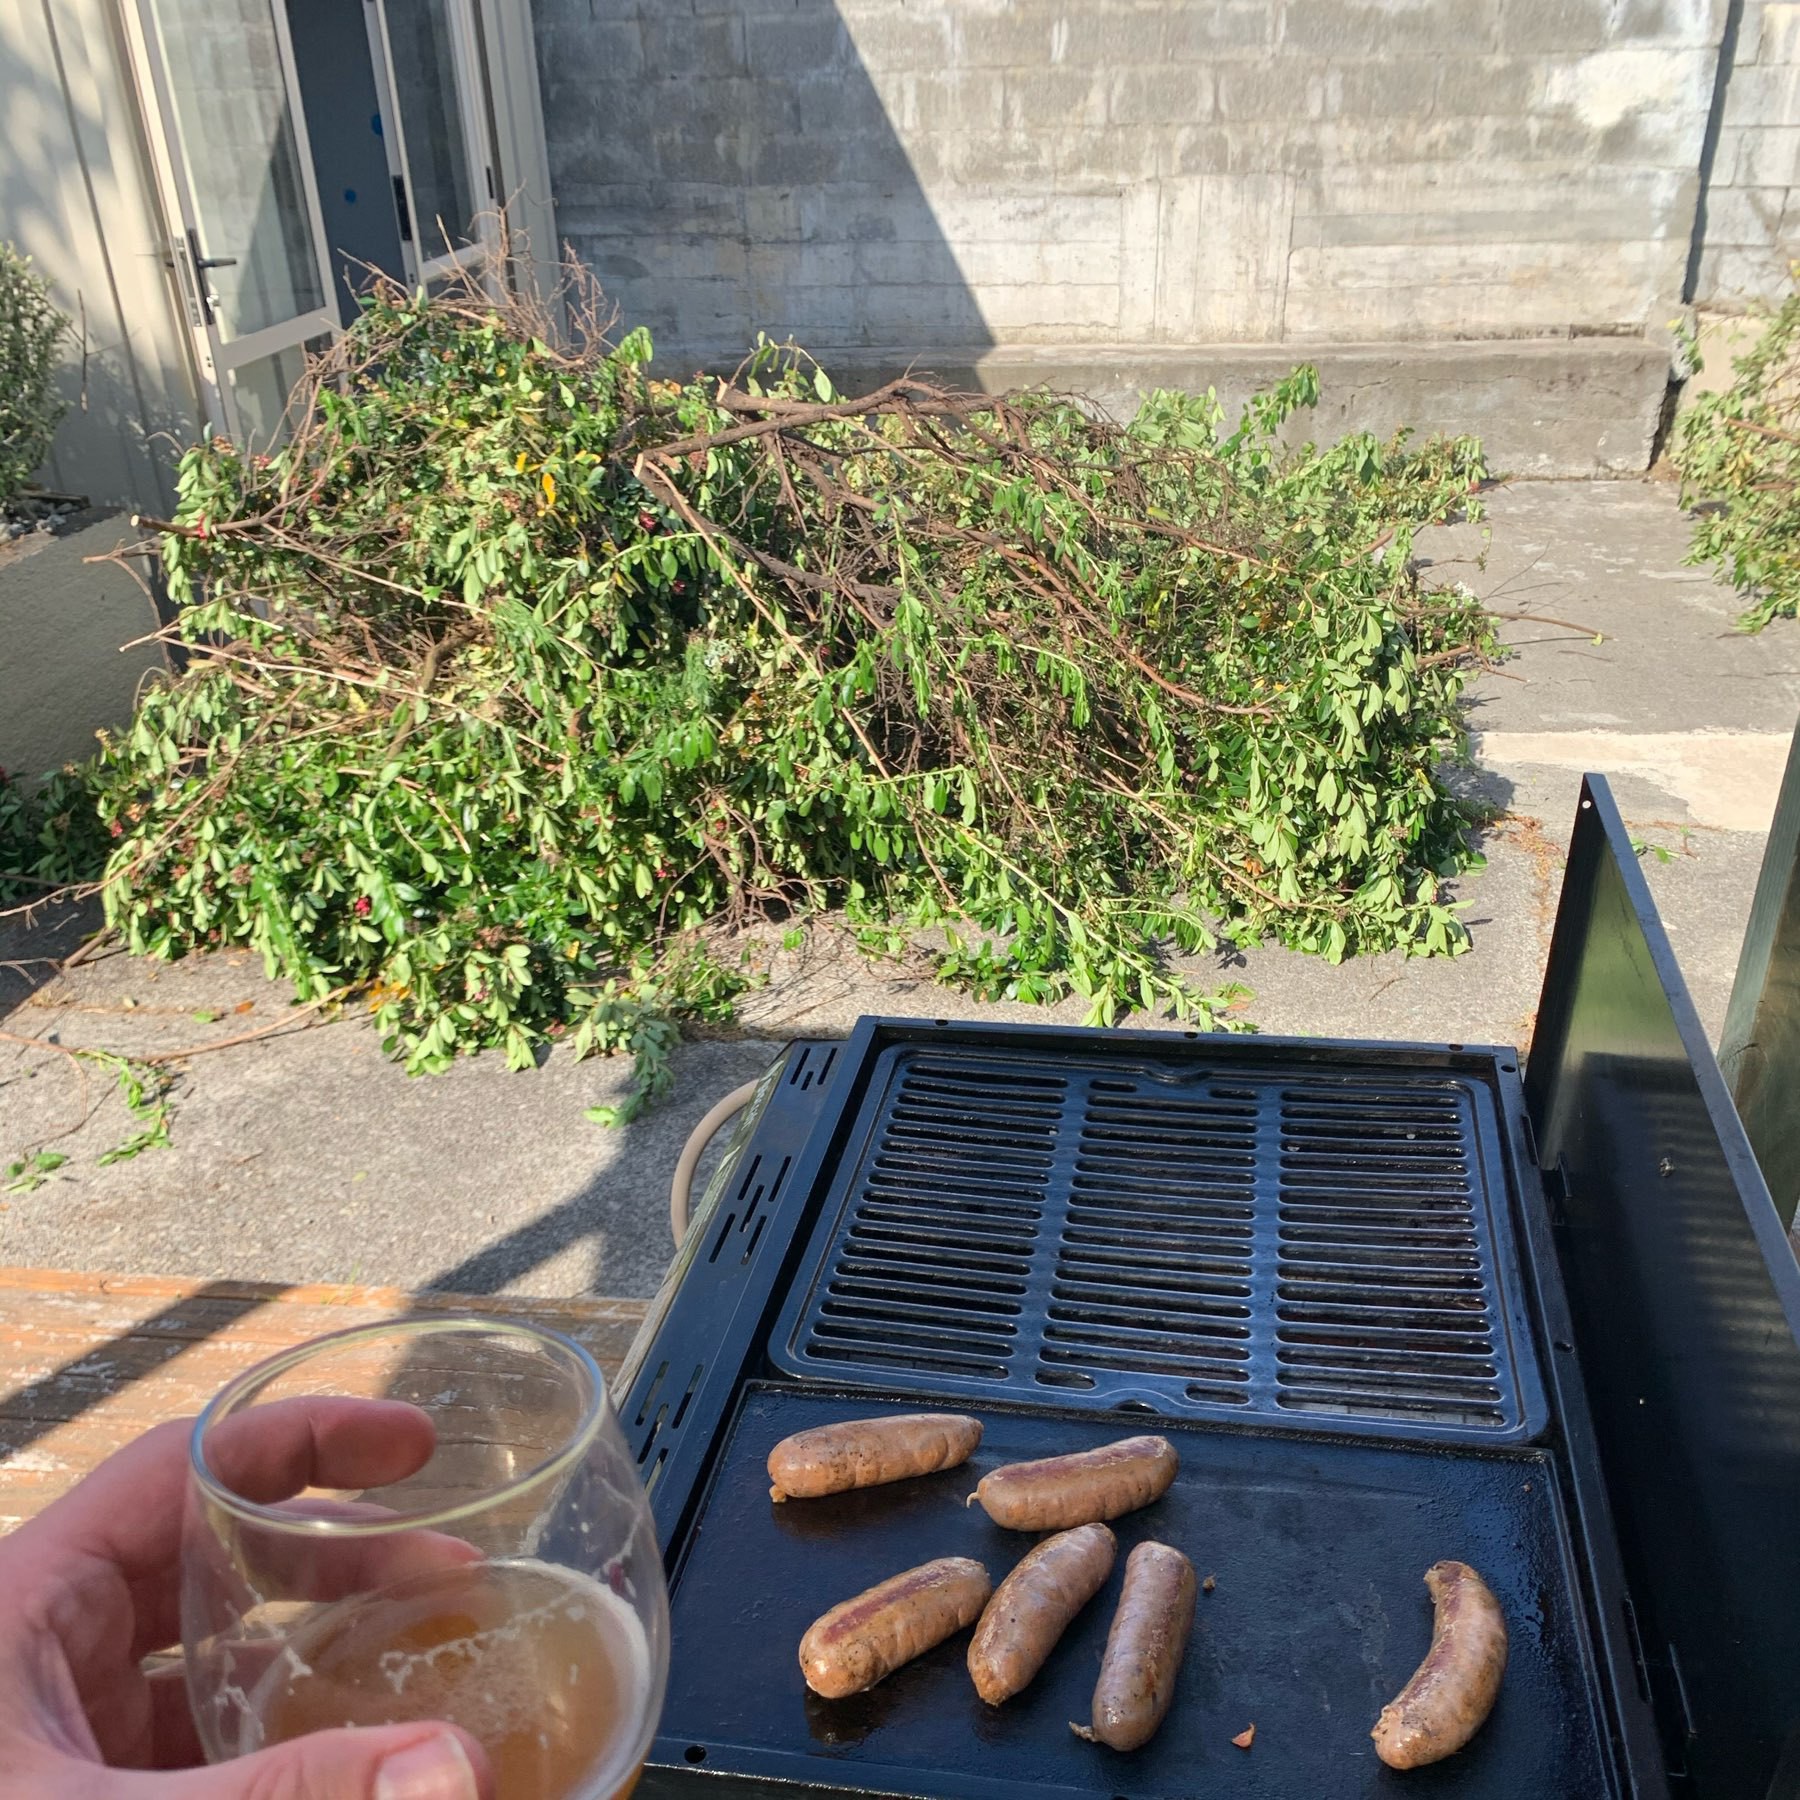 me hold a beer in front of sausages cooking on a barbeque. i. the background is a big pile of tree branches I cut through